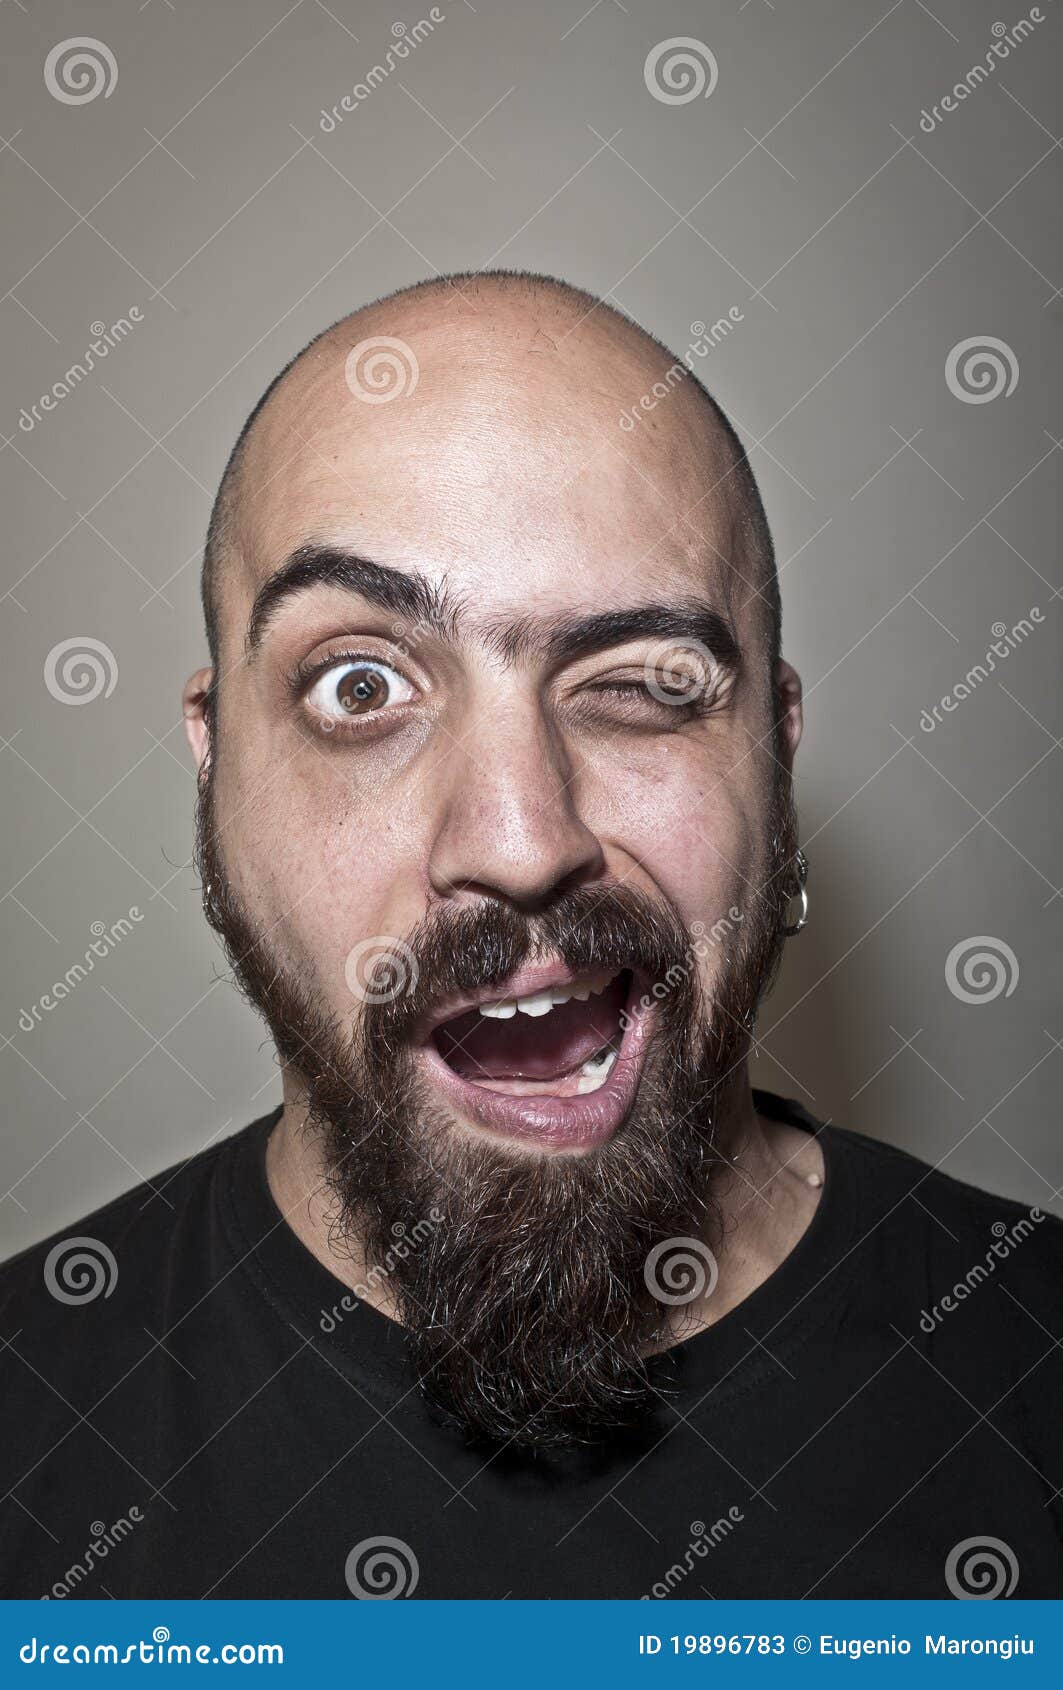 Man with beard winks stock image. Image of isolated, person - 19896783